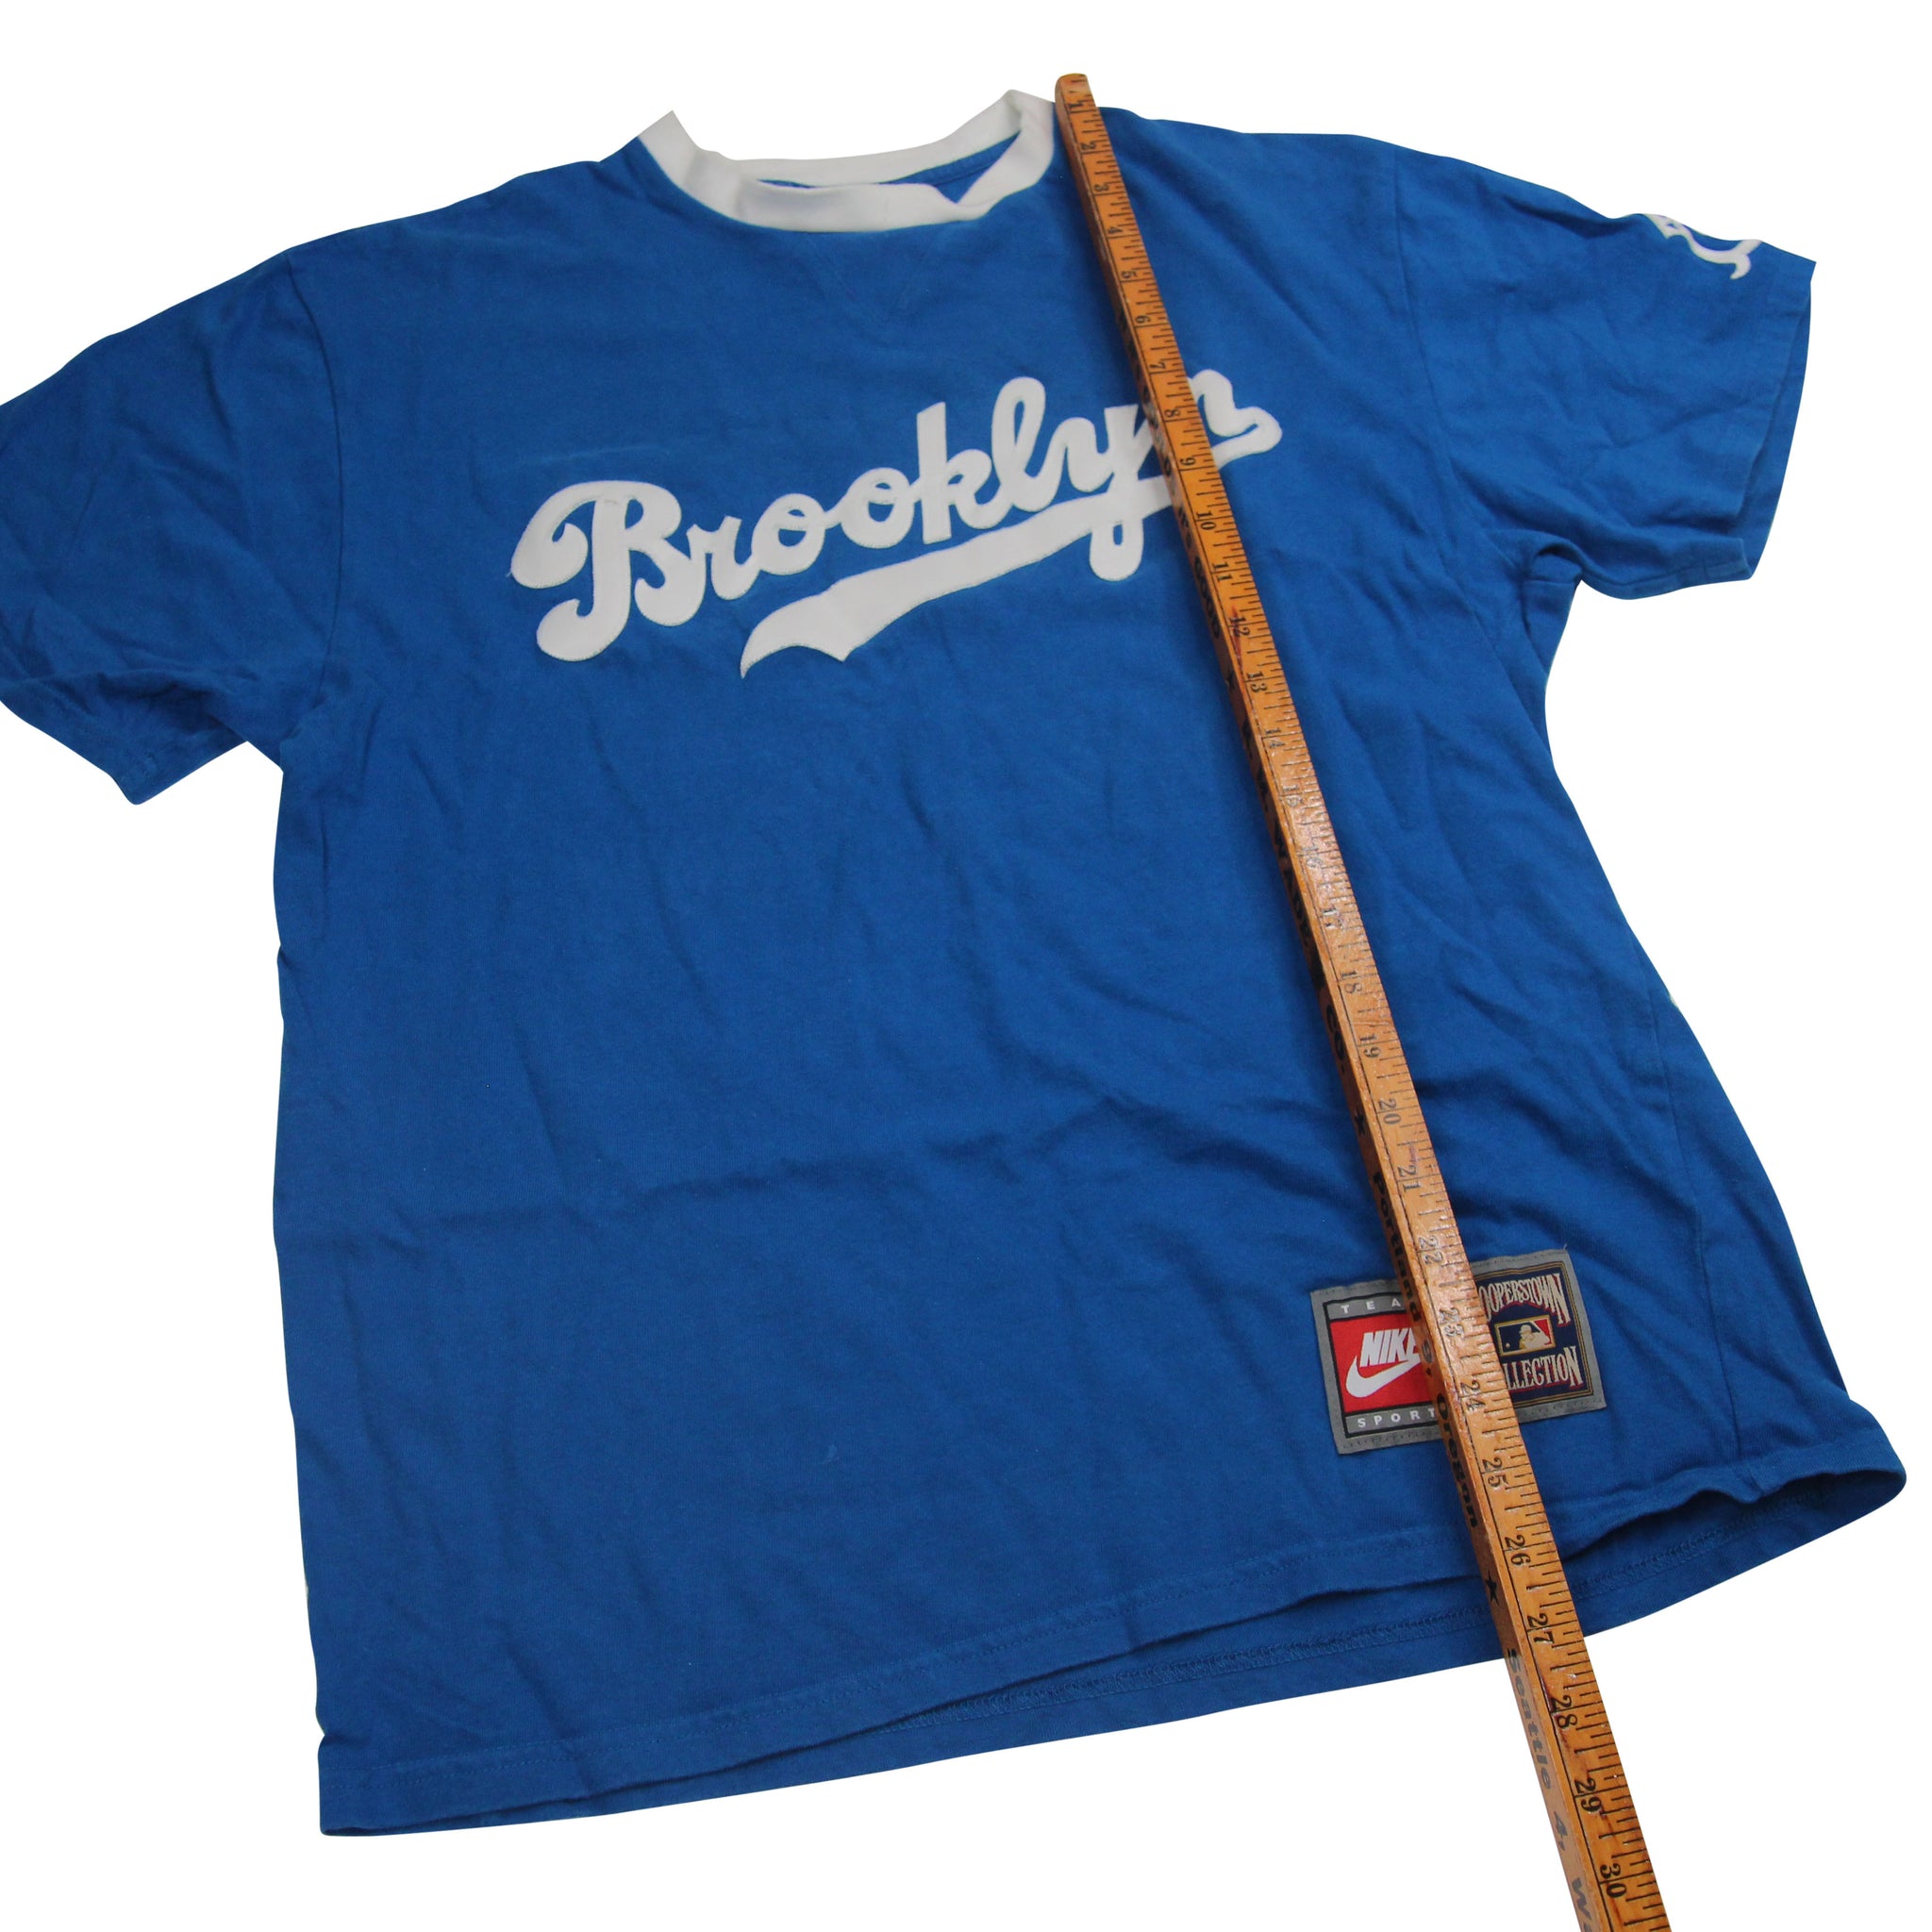 Vintage Nike Coopertown Collection Brooklyn Dodgers T Shirt - M